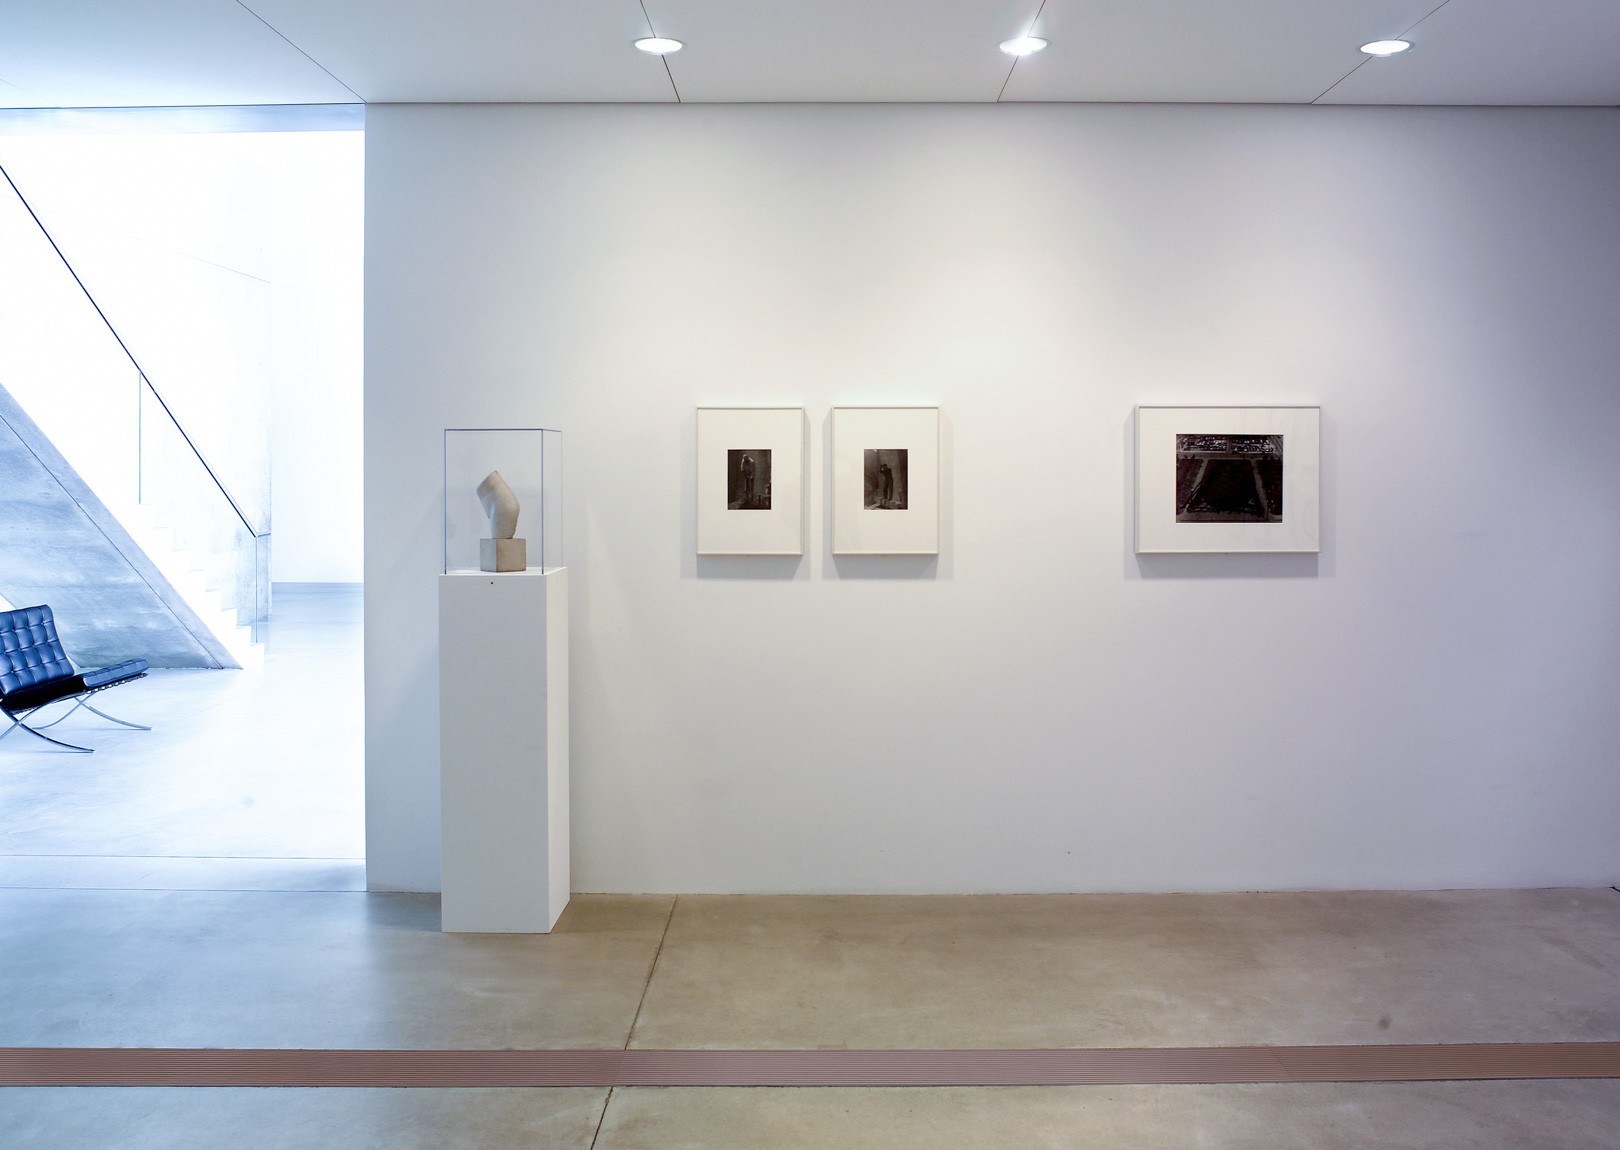 Pieces in a line on a wall in the Entrance Gallery, including Brâncuși's plaster "Torso" on a podium, two Brâncuși self portrait silver prints, and a silver print by Serra titled "Manipulated."